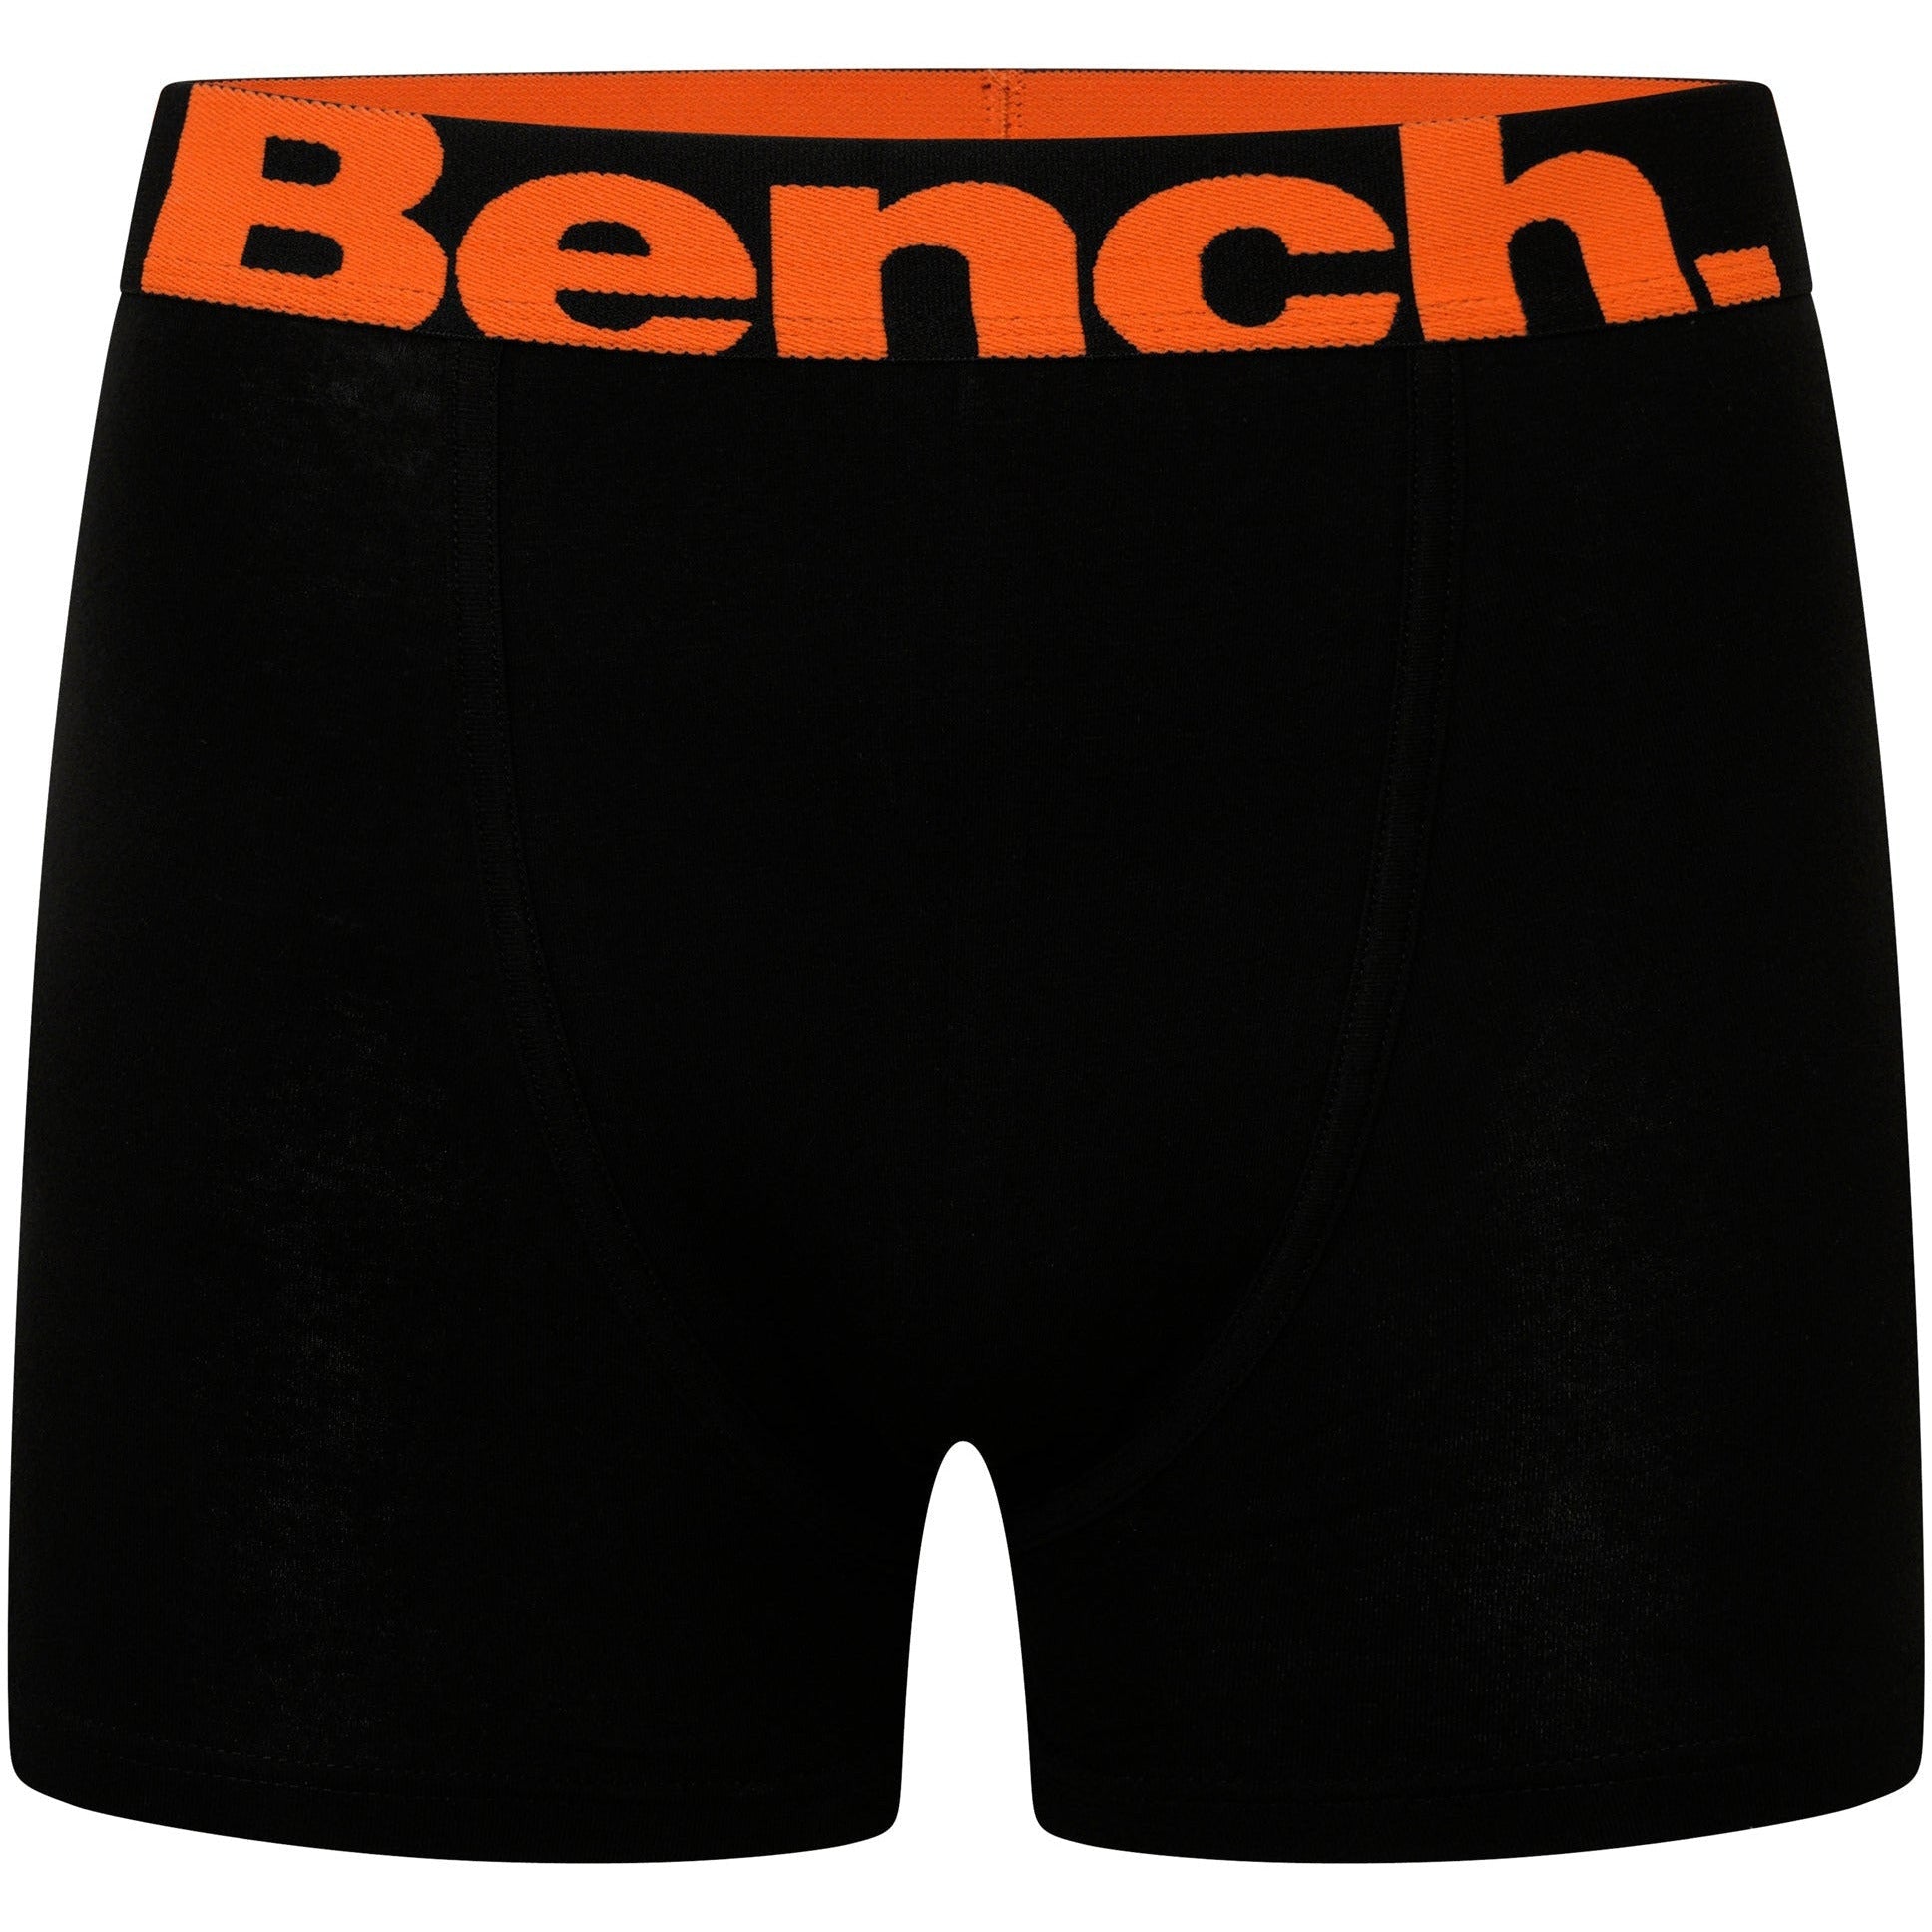 Mens 'DIEGO' 7 Pack Boxers - BLACK - Shop at www.Bench.co.uk #LoveMyHood